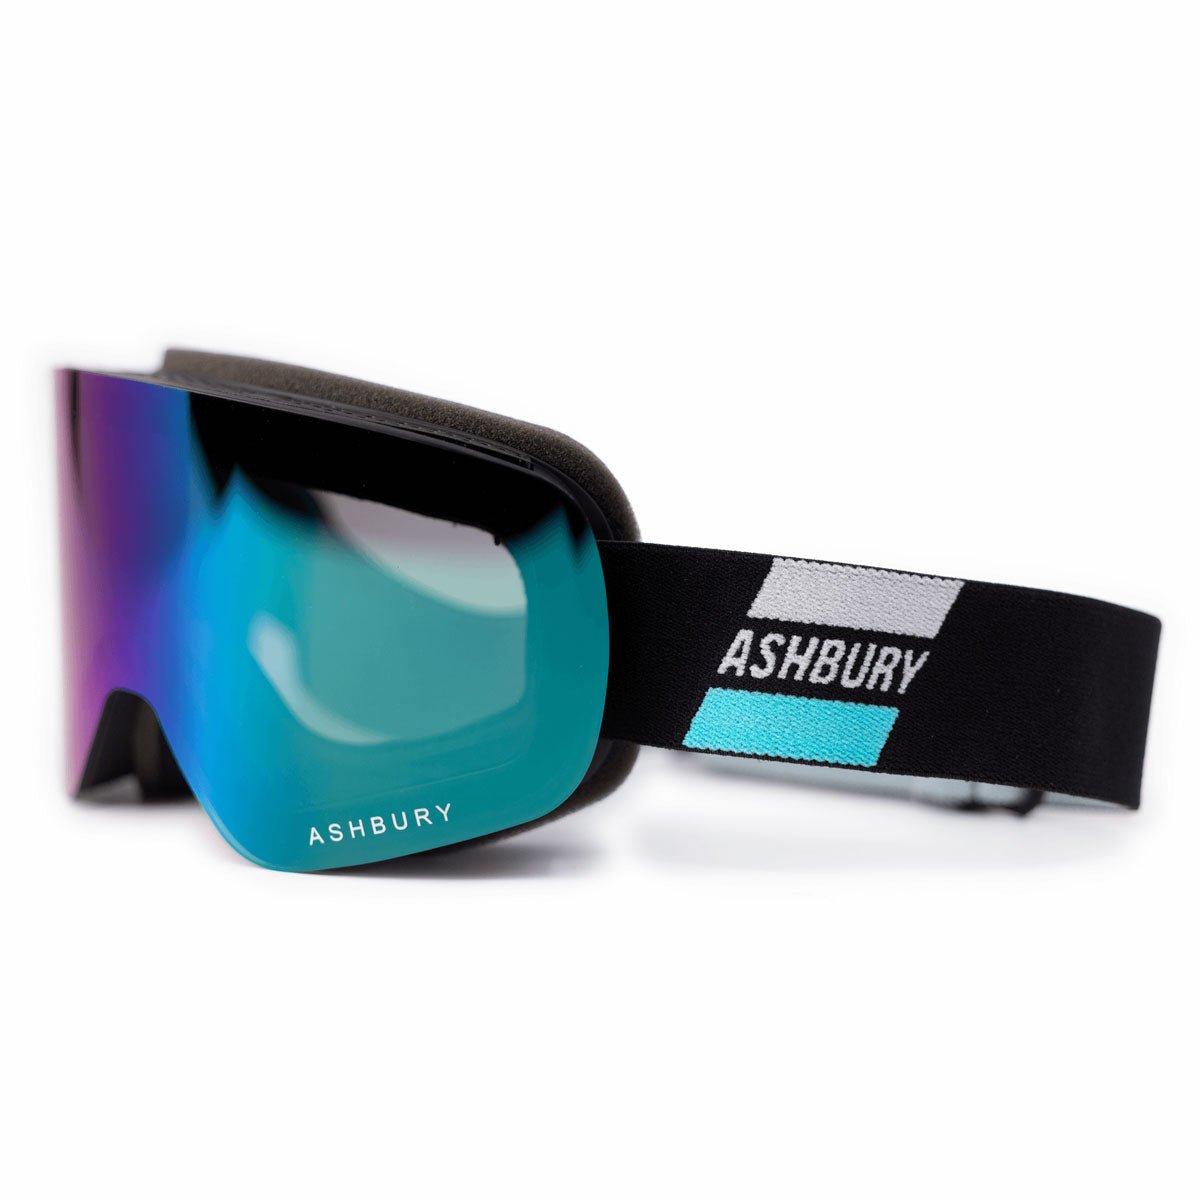 Ashbury Sonic Merlin Snowboard Goggles - Teal Mirror/Yellow Spare image 2